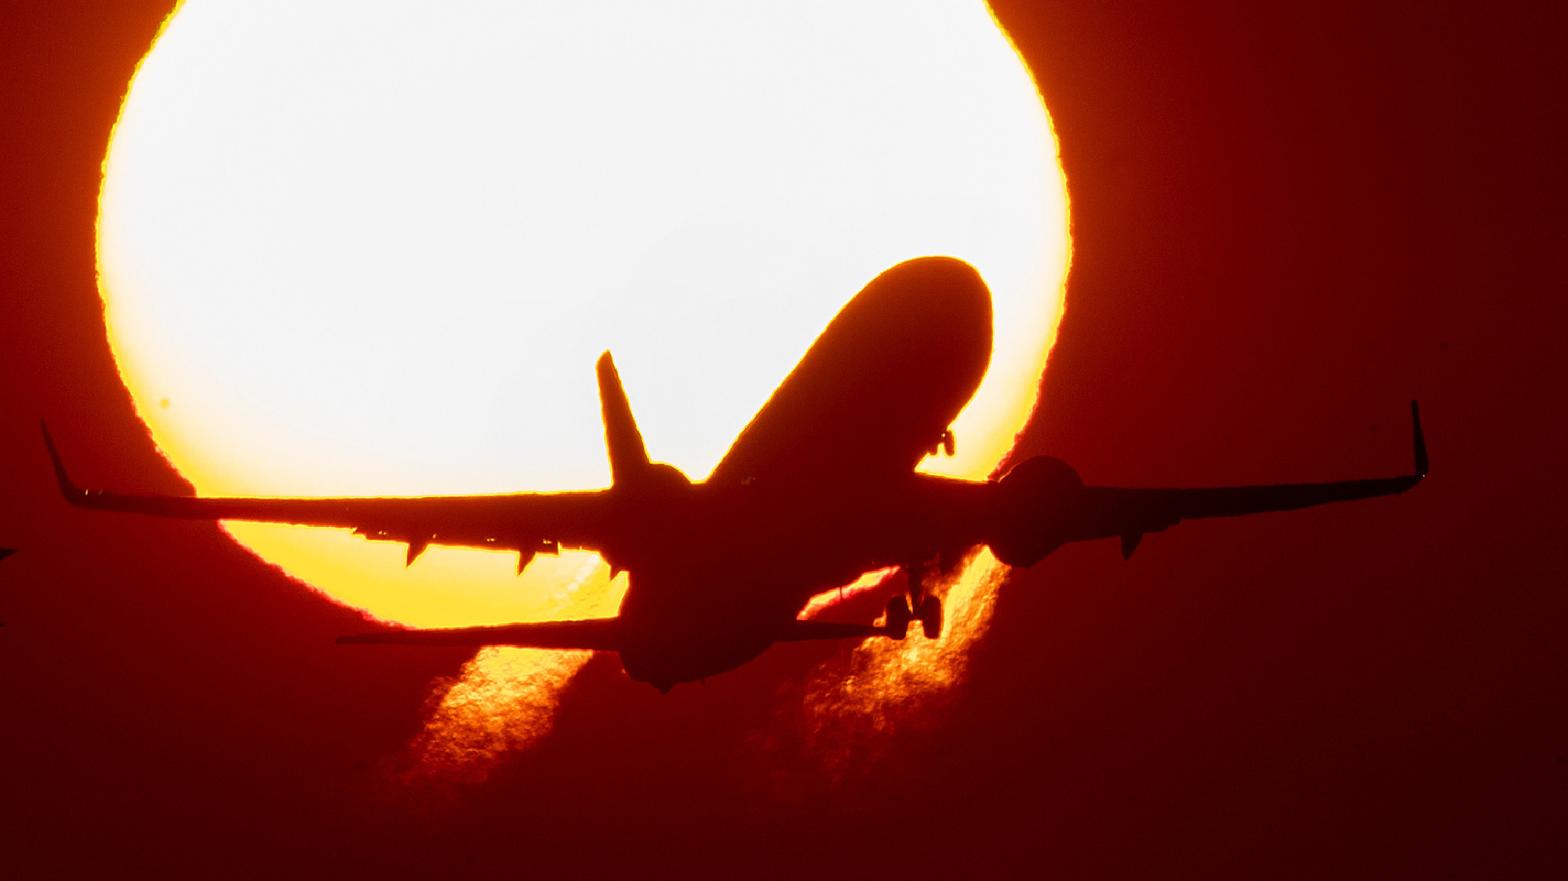 A plane in front of the sun. It's a metaphor. (Photo: AP, AP)